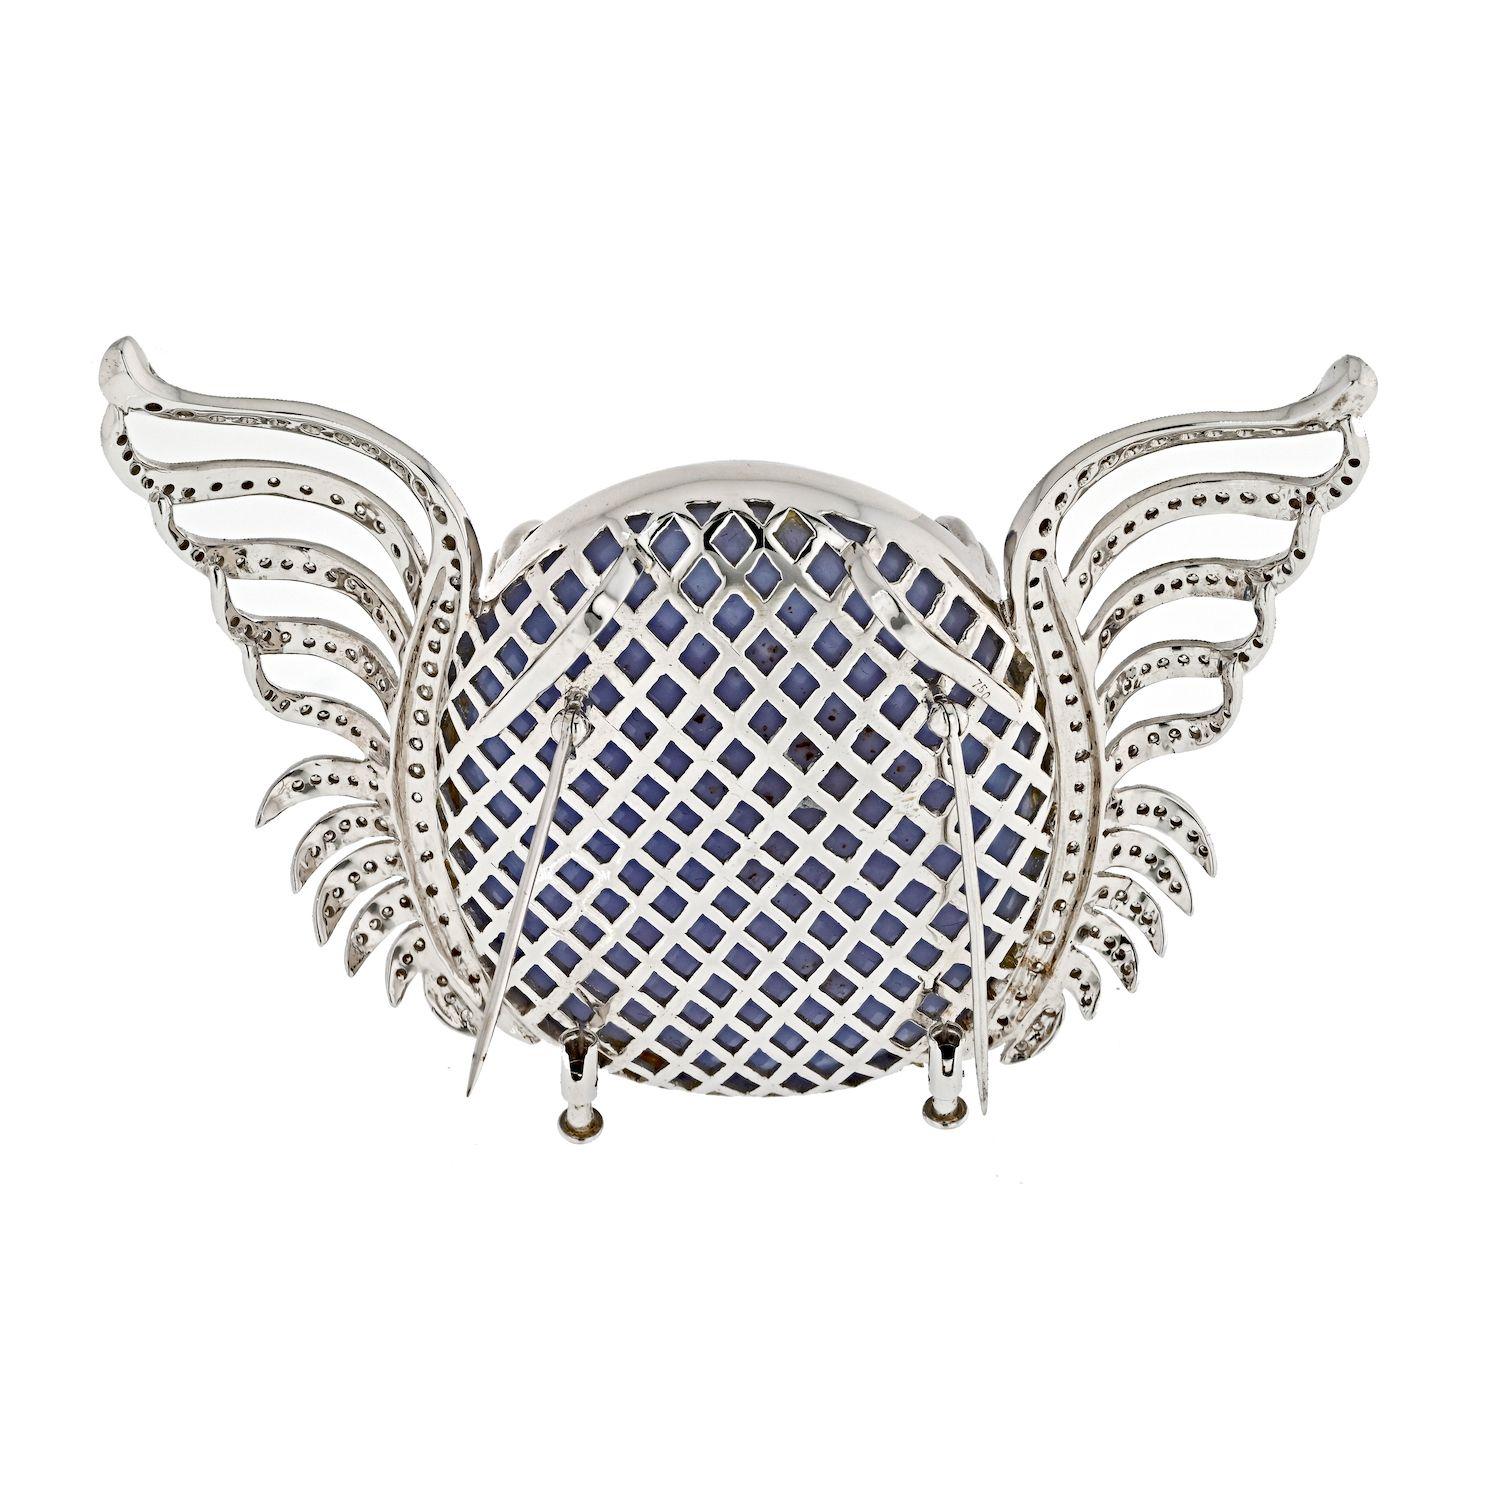 Discover the epitome of bespoke craftsmanship with this exquisite custom-made brooch, a fusion of elegance and versatility. Crafted in 18k white gold, the centerpiece boasts an oval cabochon cut quartz in a captivating light blue hue, measuring